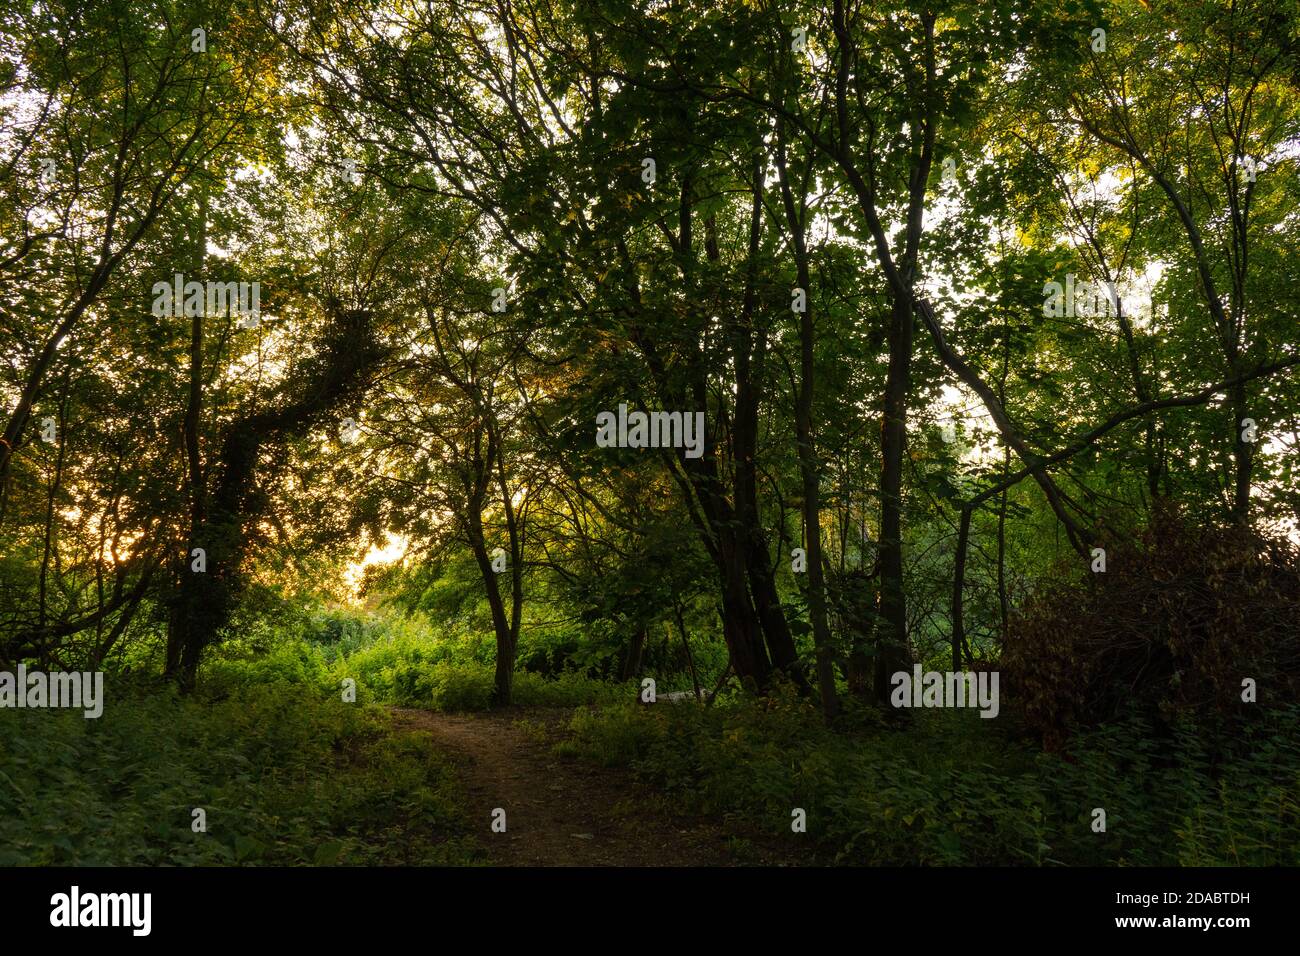 Magical light through trees along path at dusk summer night time shining through lush green leaves. Beautiful dreamy fairy tale atmosphere Stock Photo